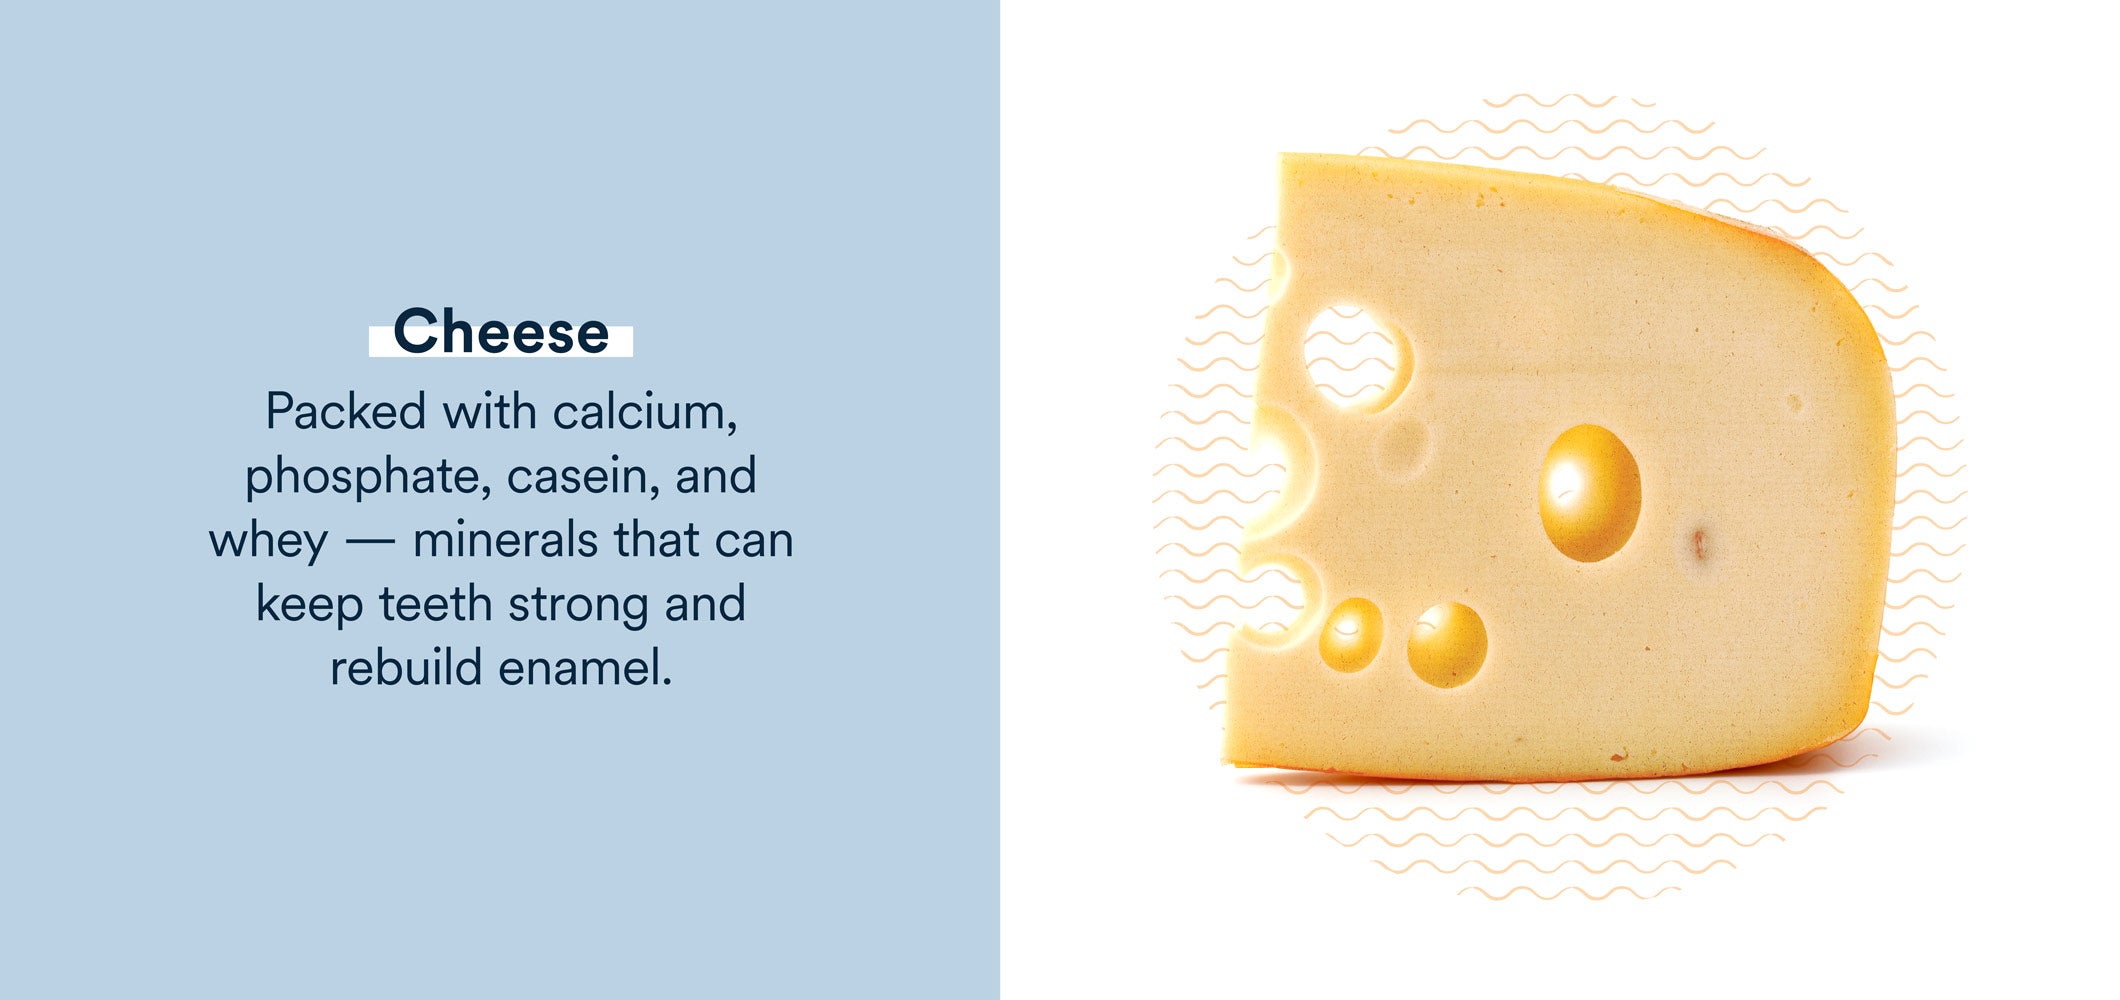 cheese is packed with minerals that can keep teeth strong